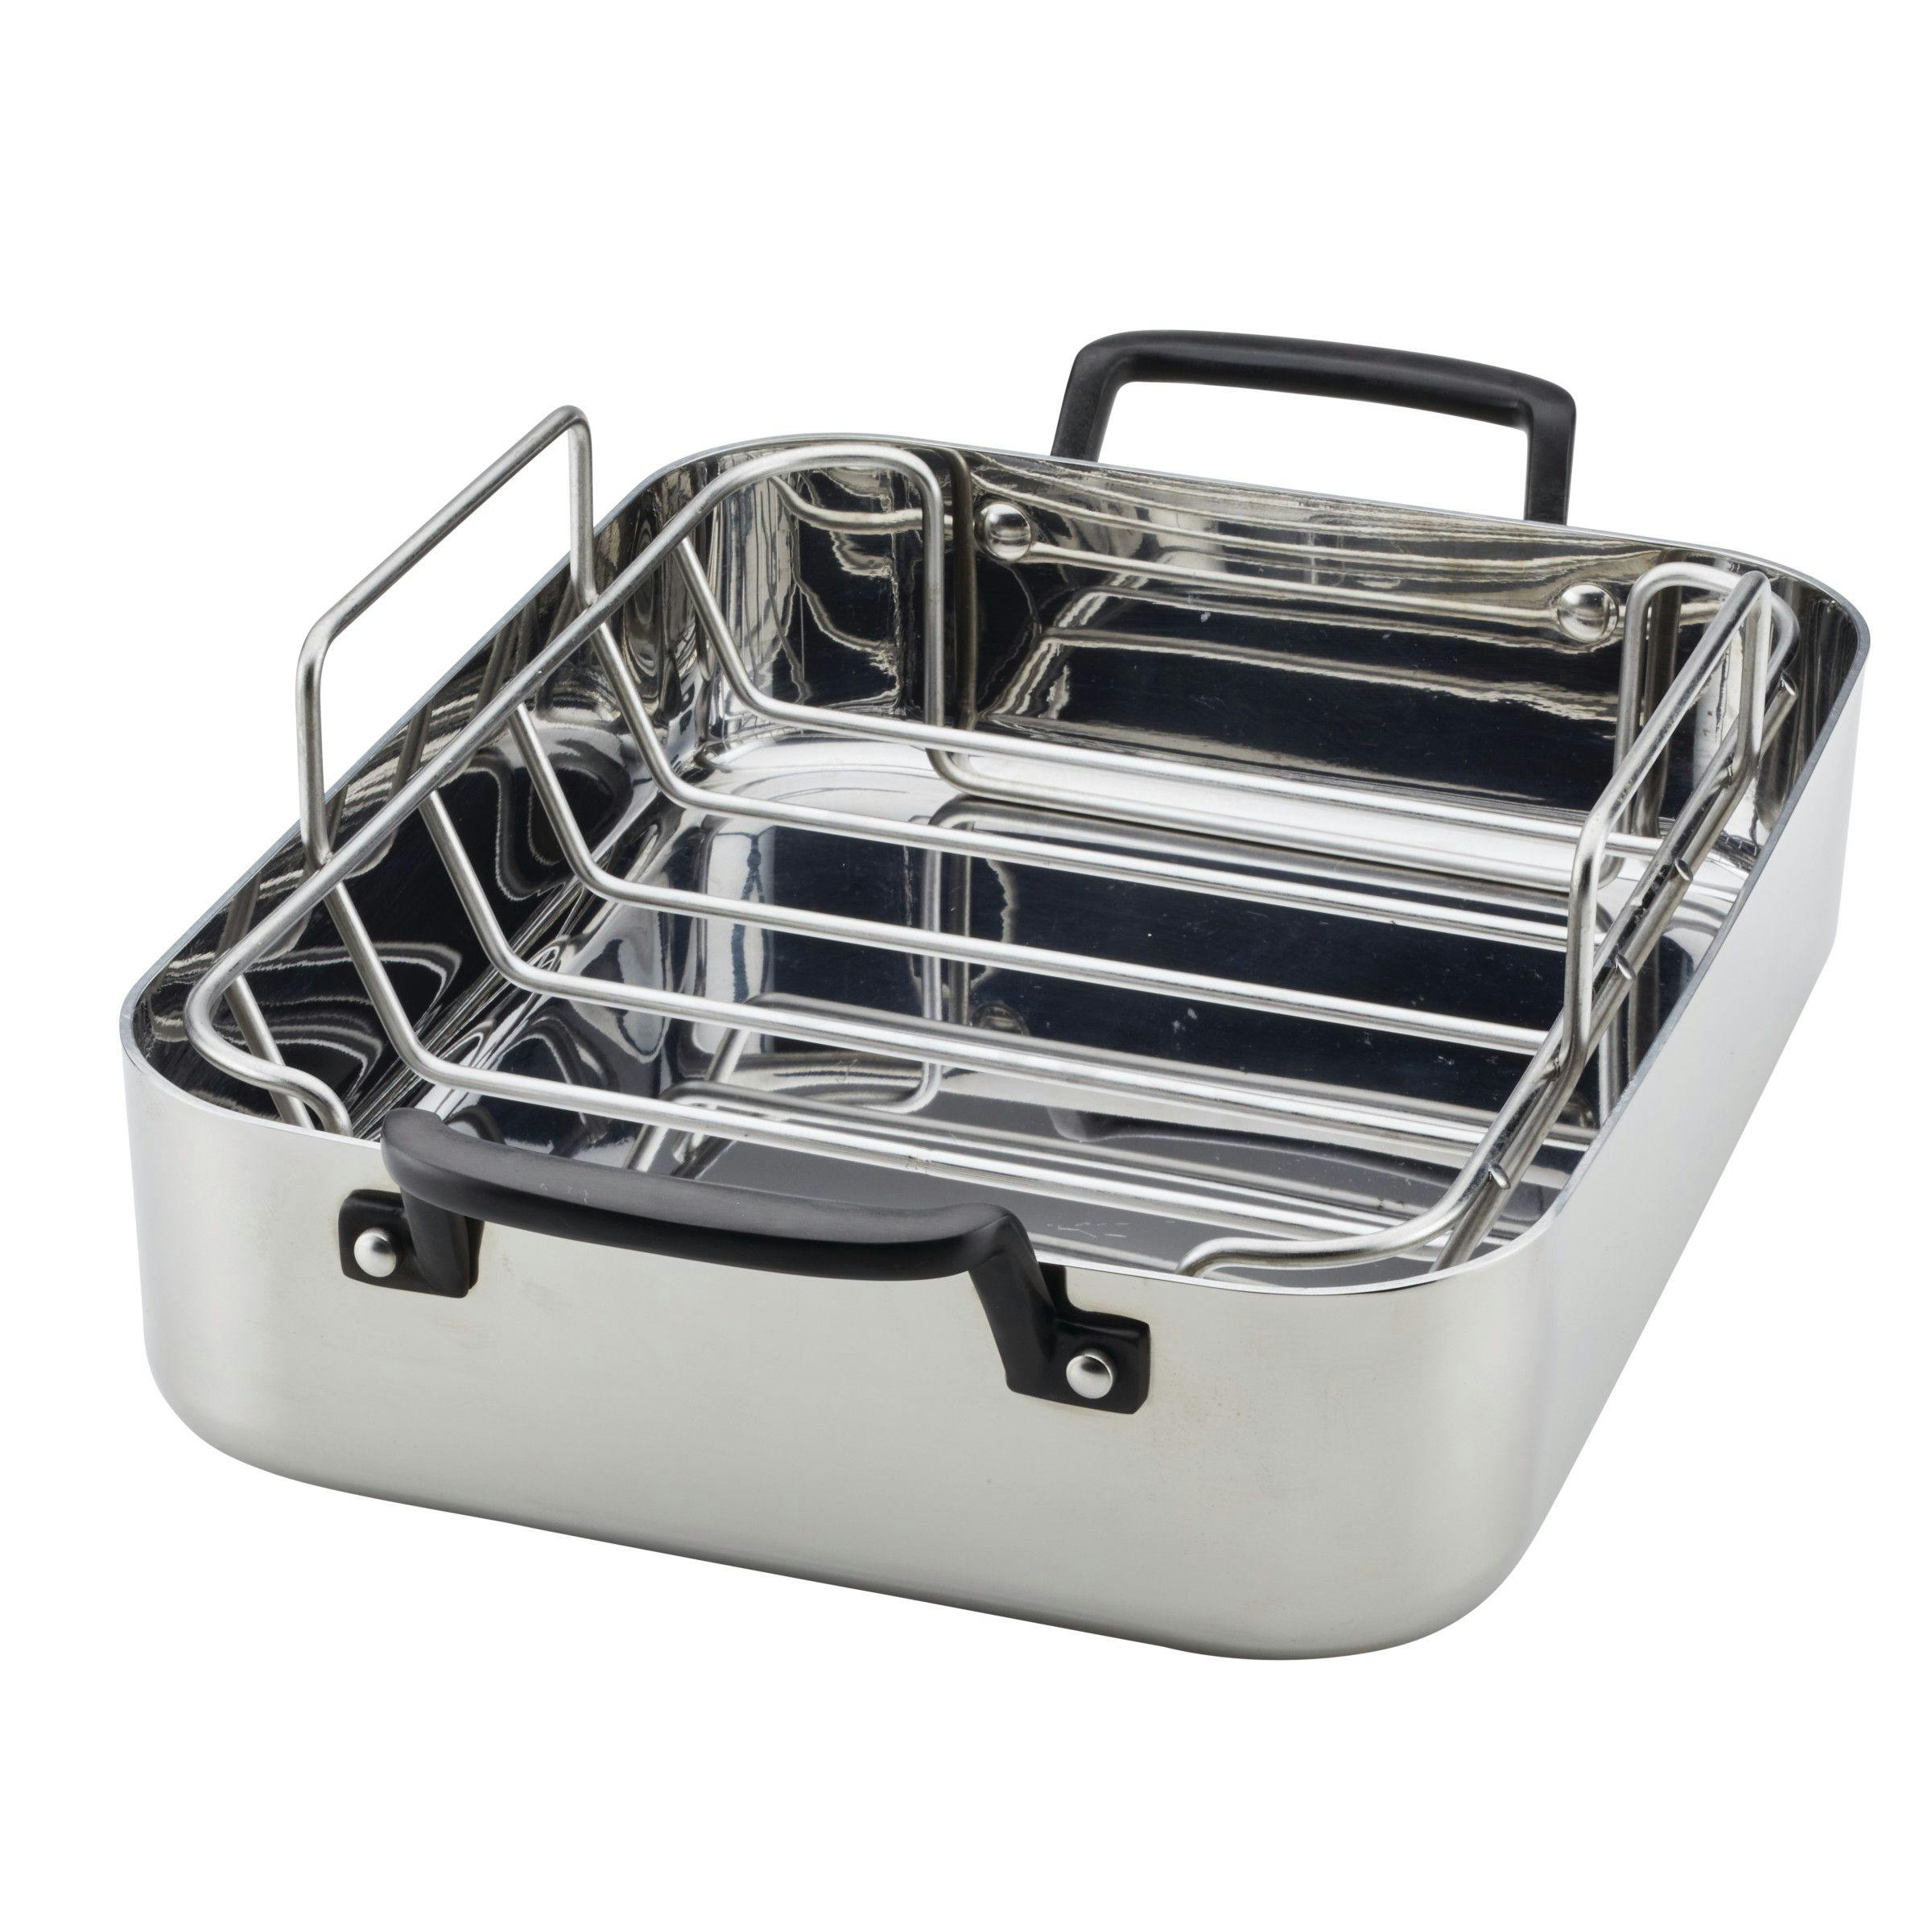 KitchenAid 5-Ply Clad Stainless Steel Roaster with Removable Rack, 15-Inch x 11.5-Inch, Polished Stainless Steel